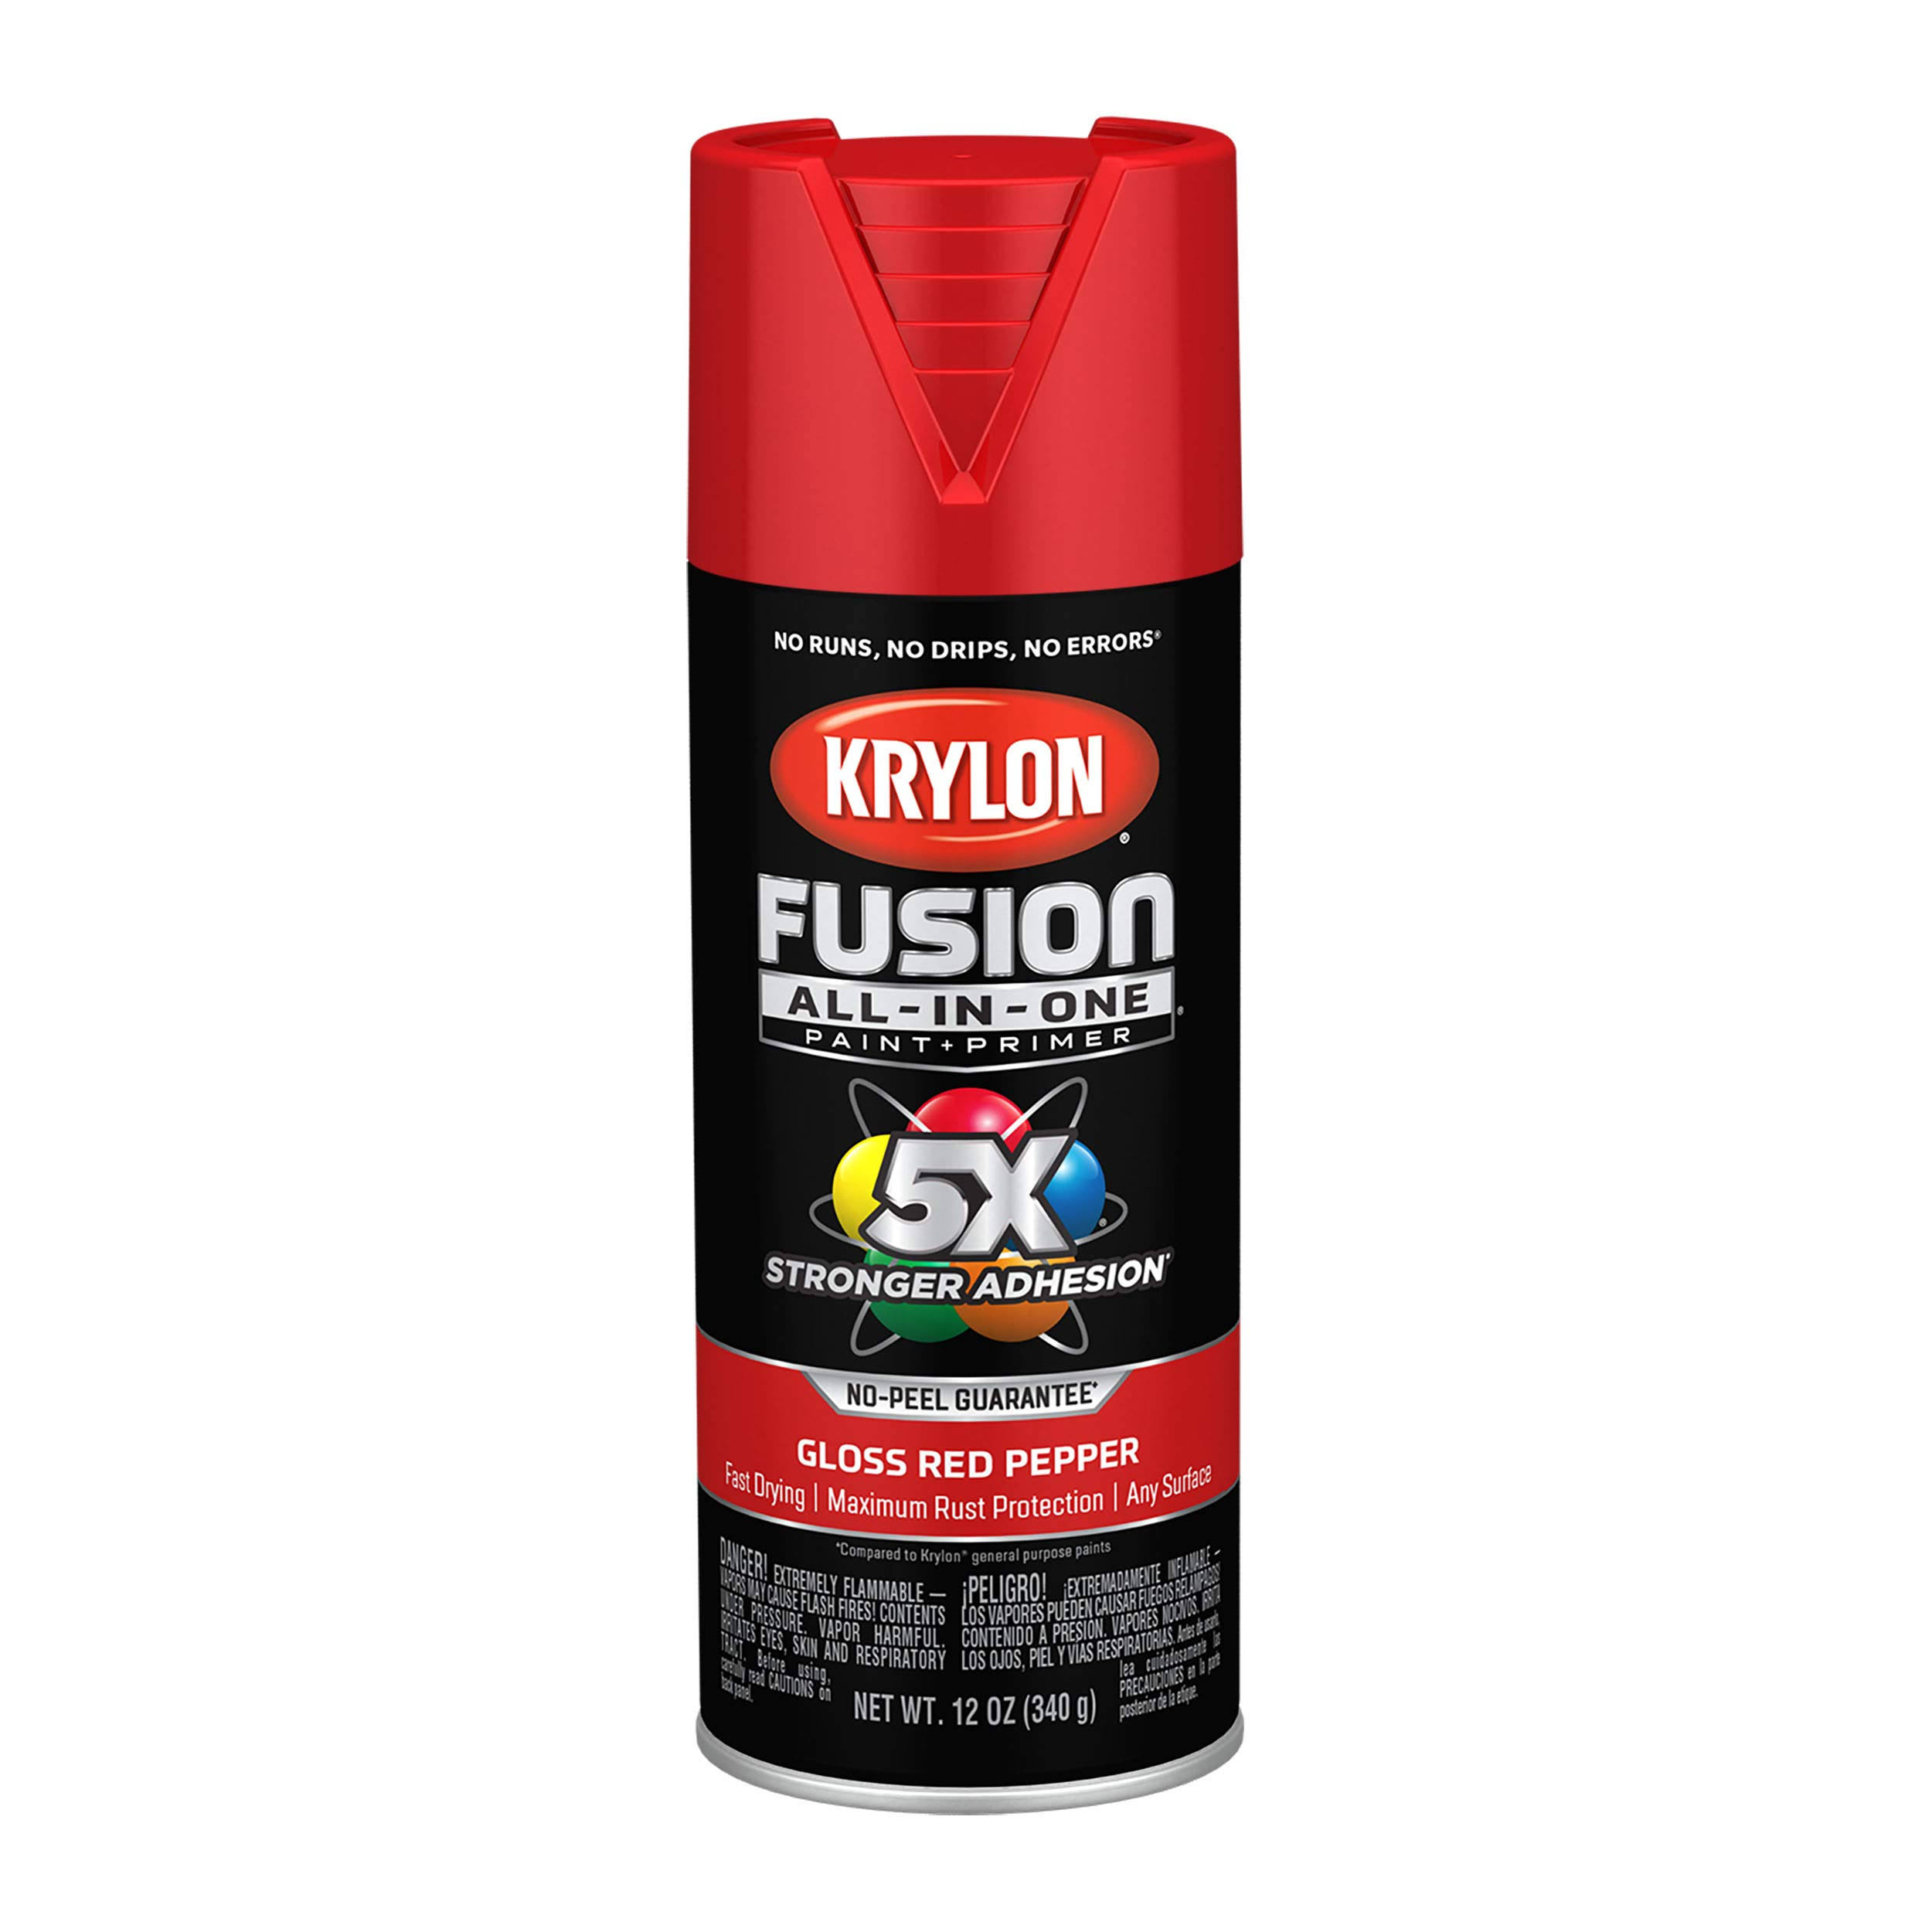 Krylon Fusion All-in-One Spray Paint Gloss Red Pepper 12 oz.